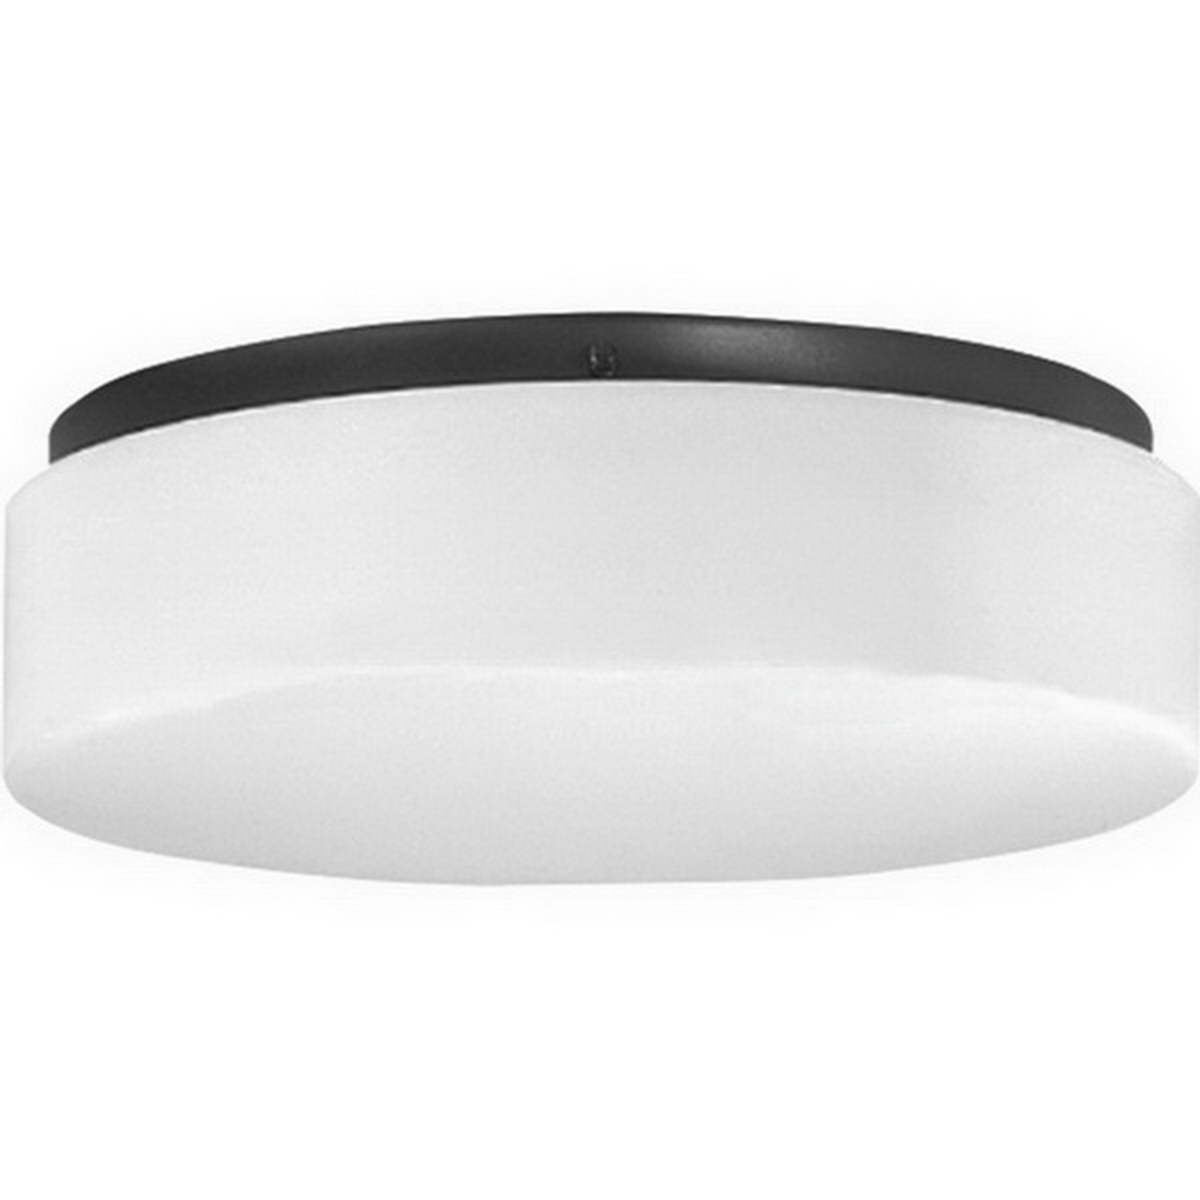 Drums and Clouds 11 in LED Flush Mount Light - Bees Lighting